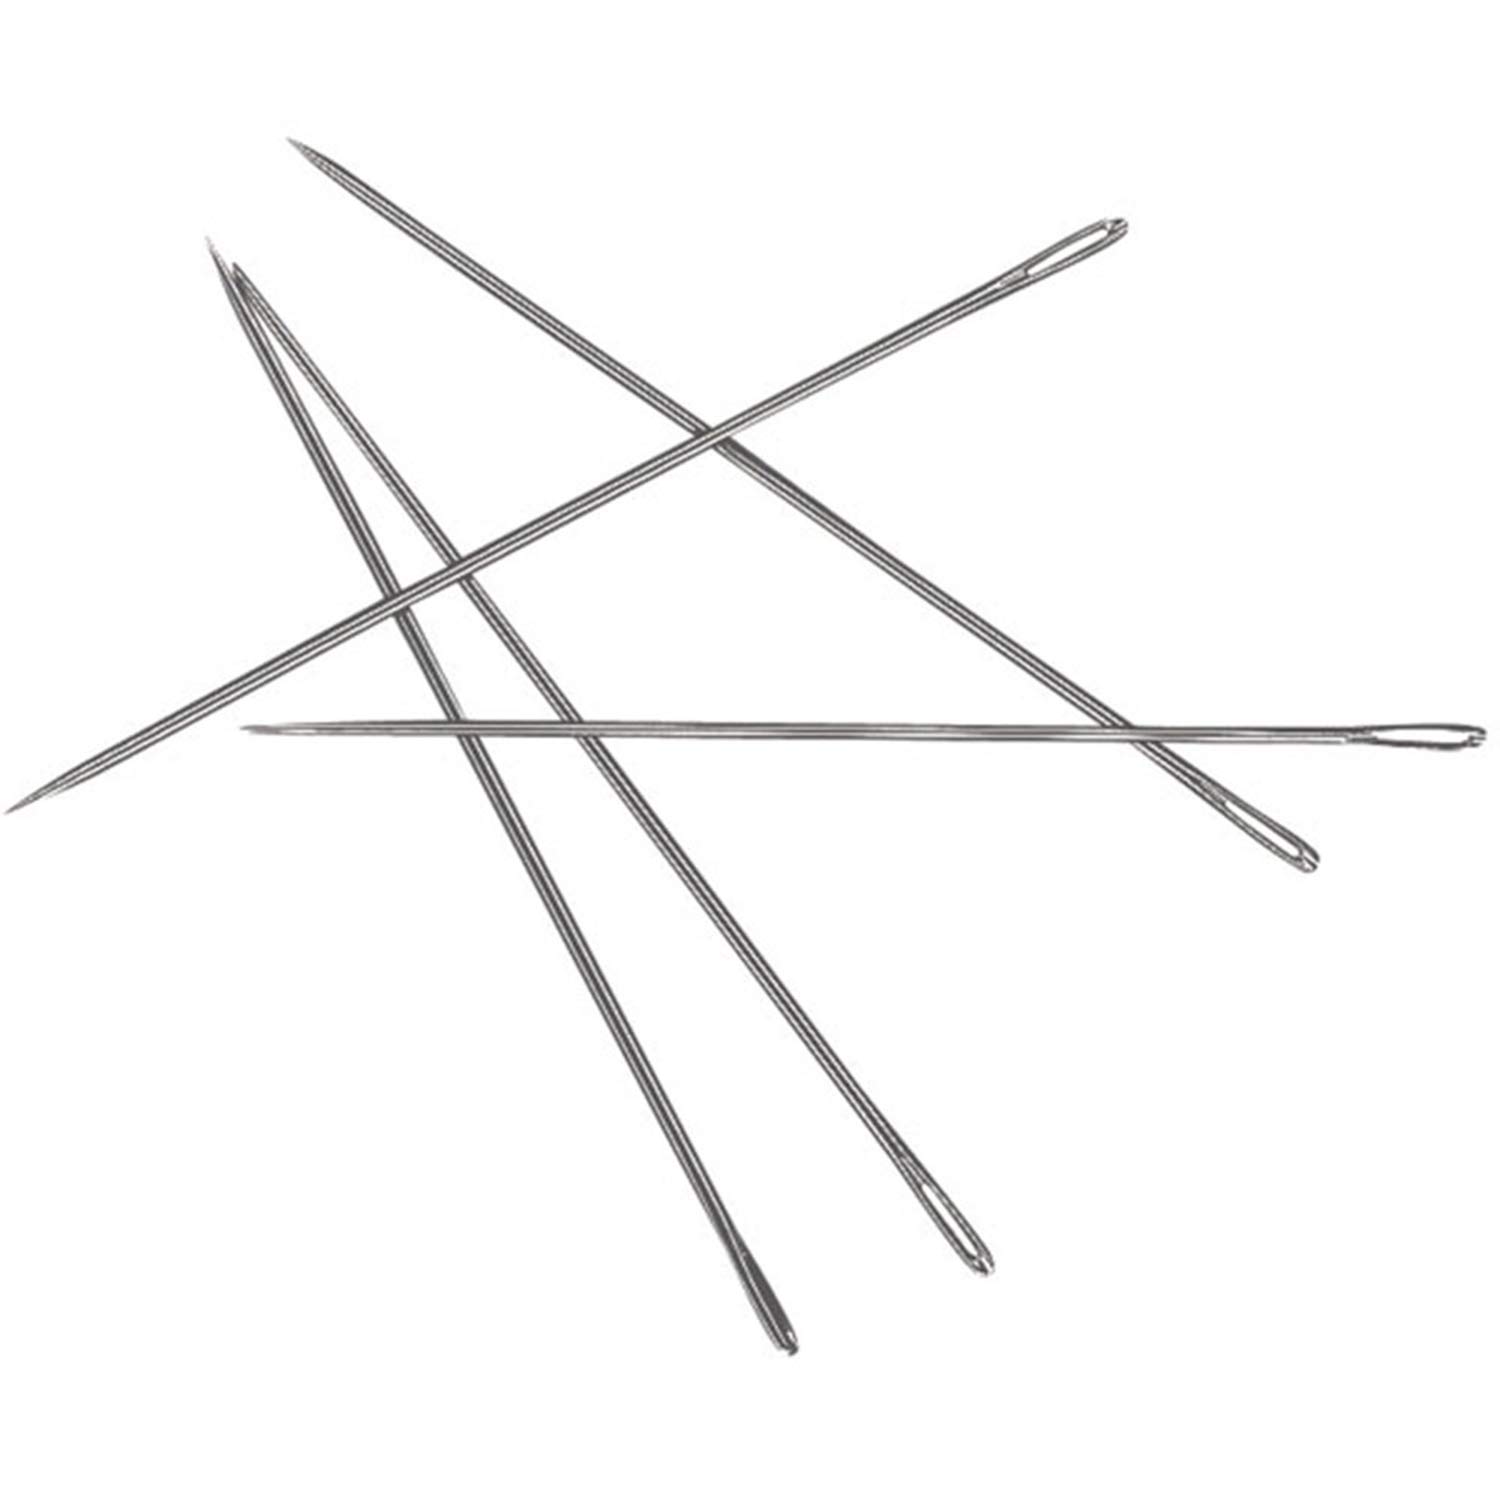 Lineco Book Binding Stainless Steel Needles, Ideally for Sewing Books and  Slightly Blunt Point to Reduce Snagging, Perfect Length Pack of 5